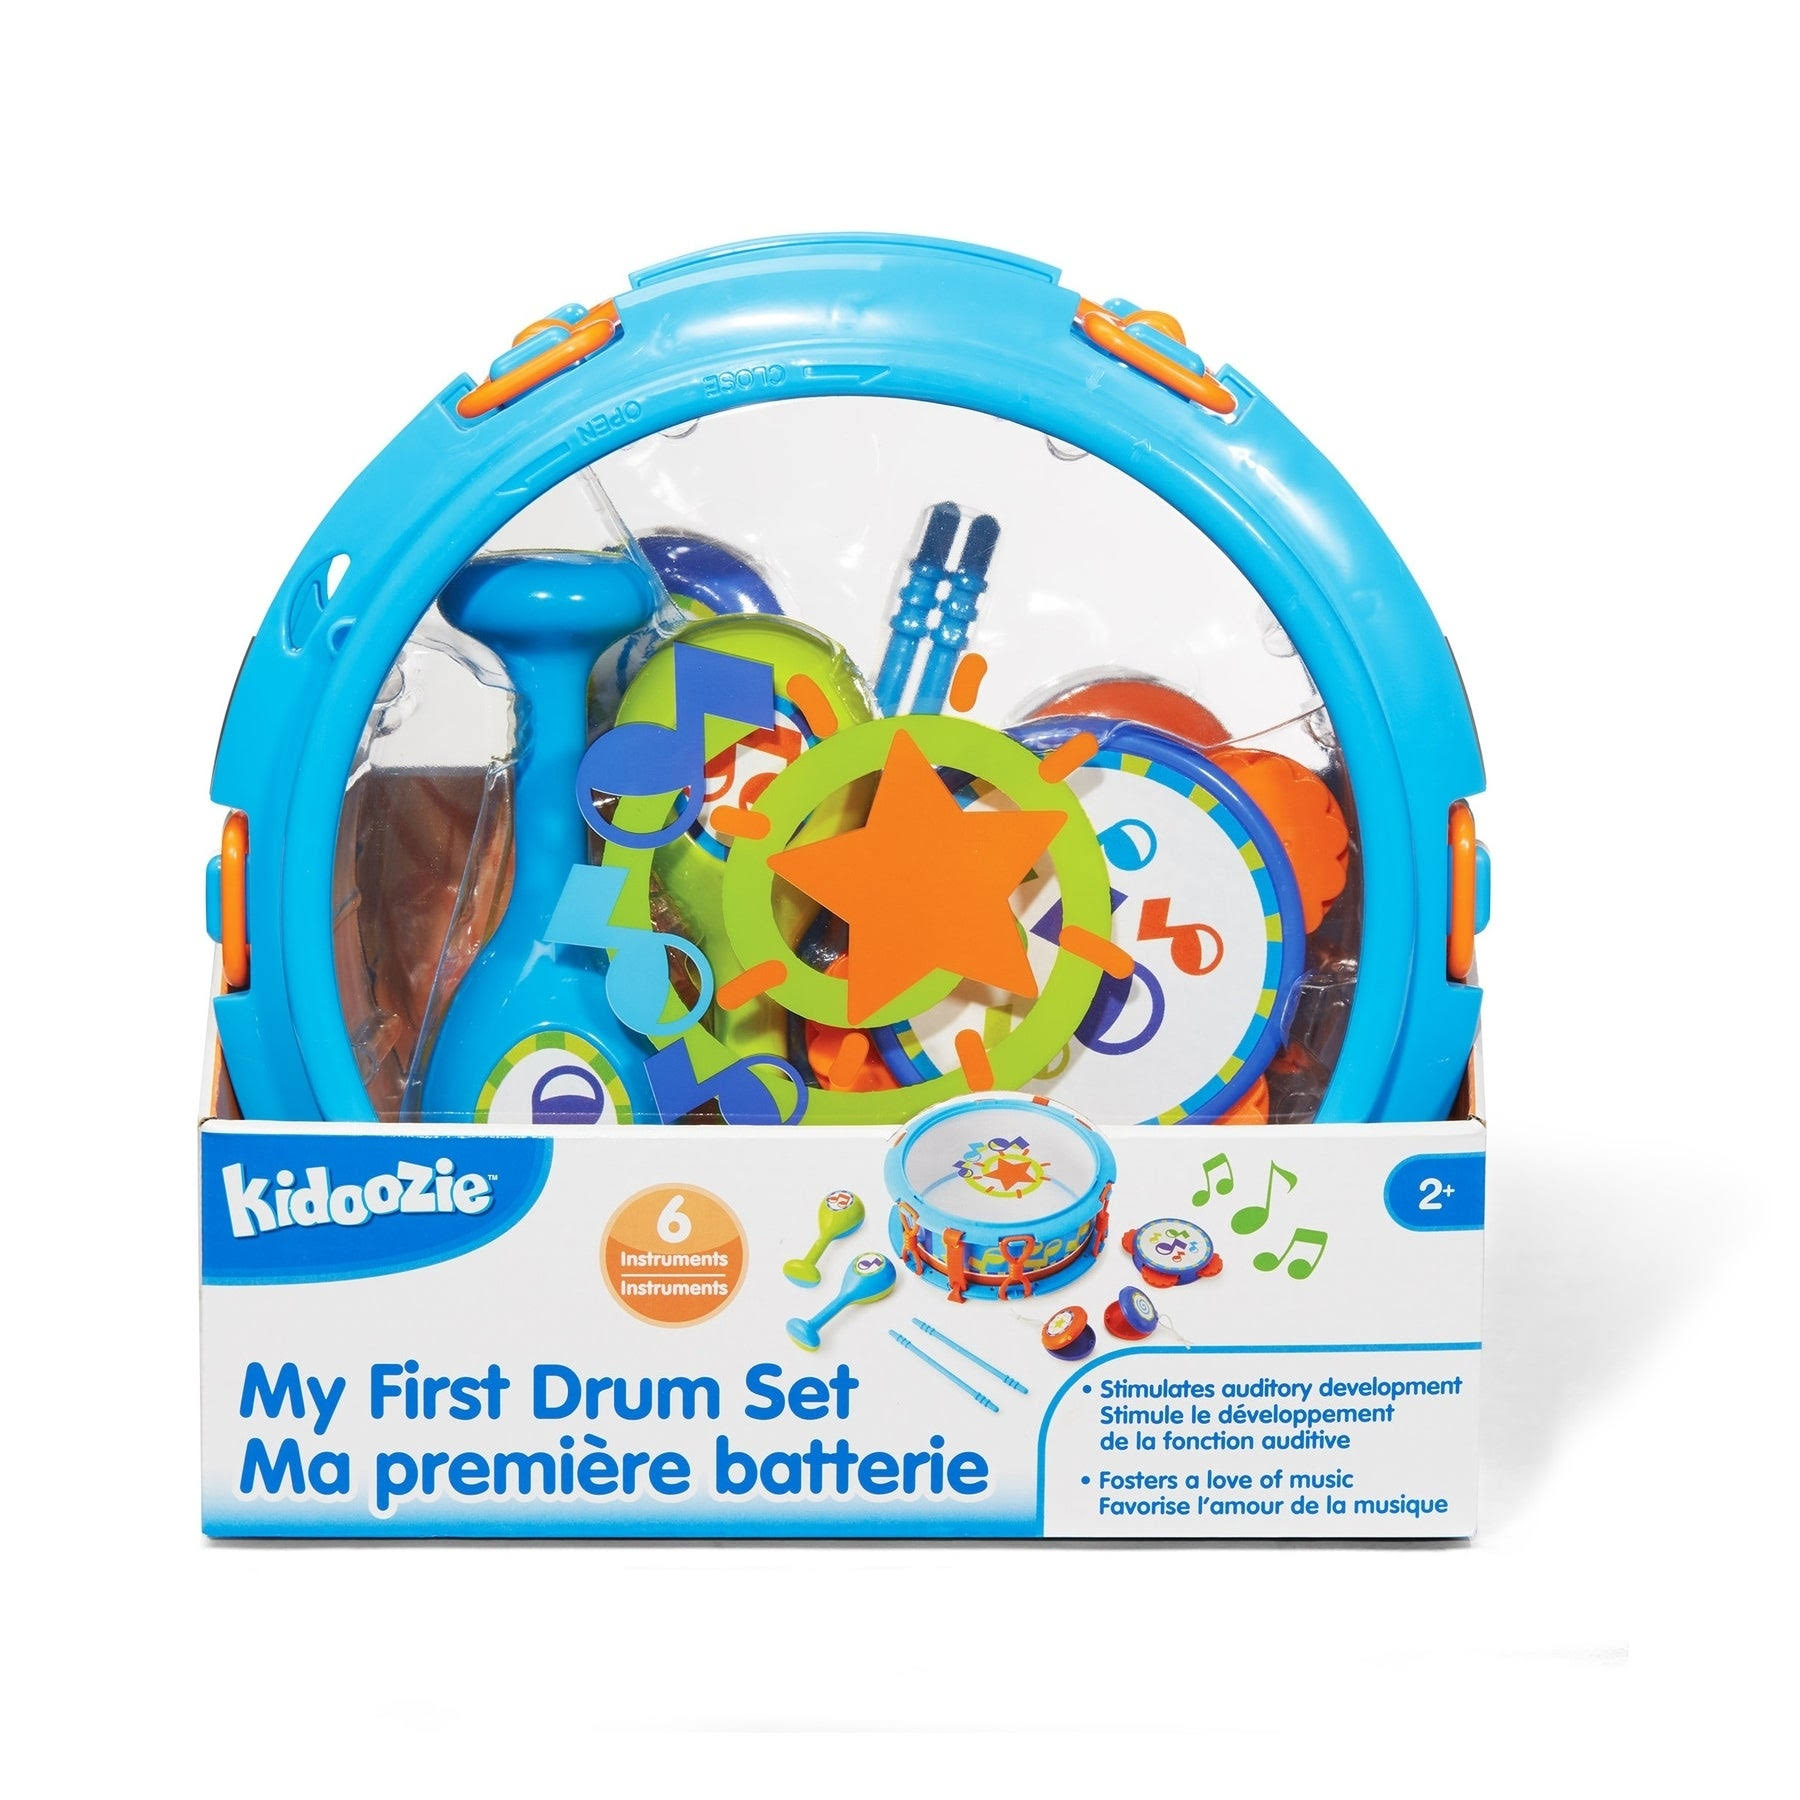 Kidoozie My First Drum Set, 6 Instruments for Children Ages 2 Years an